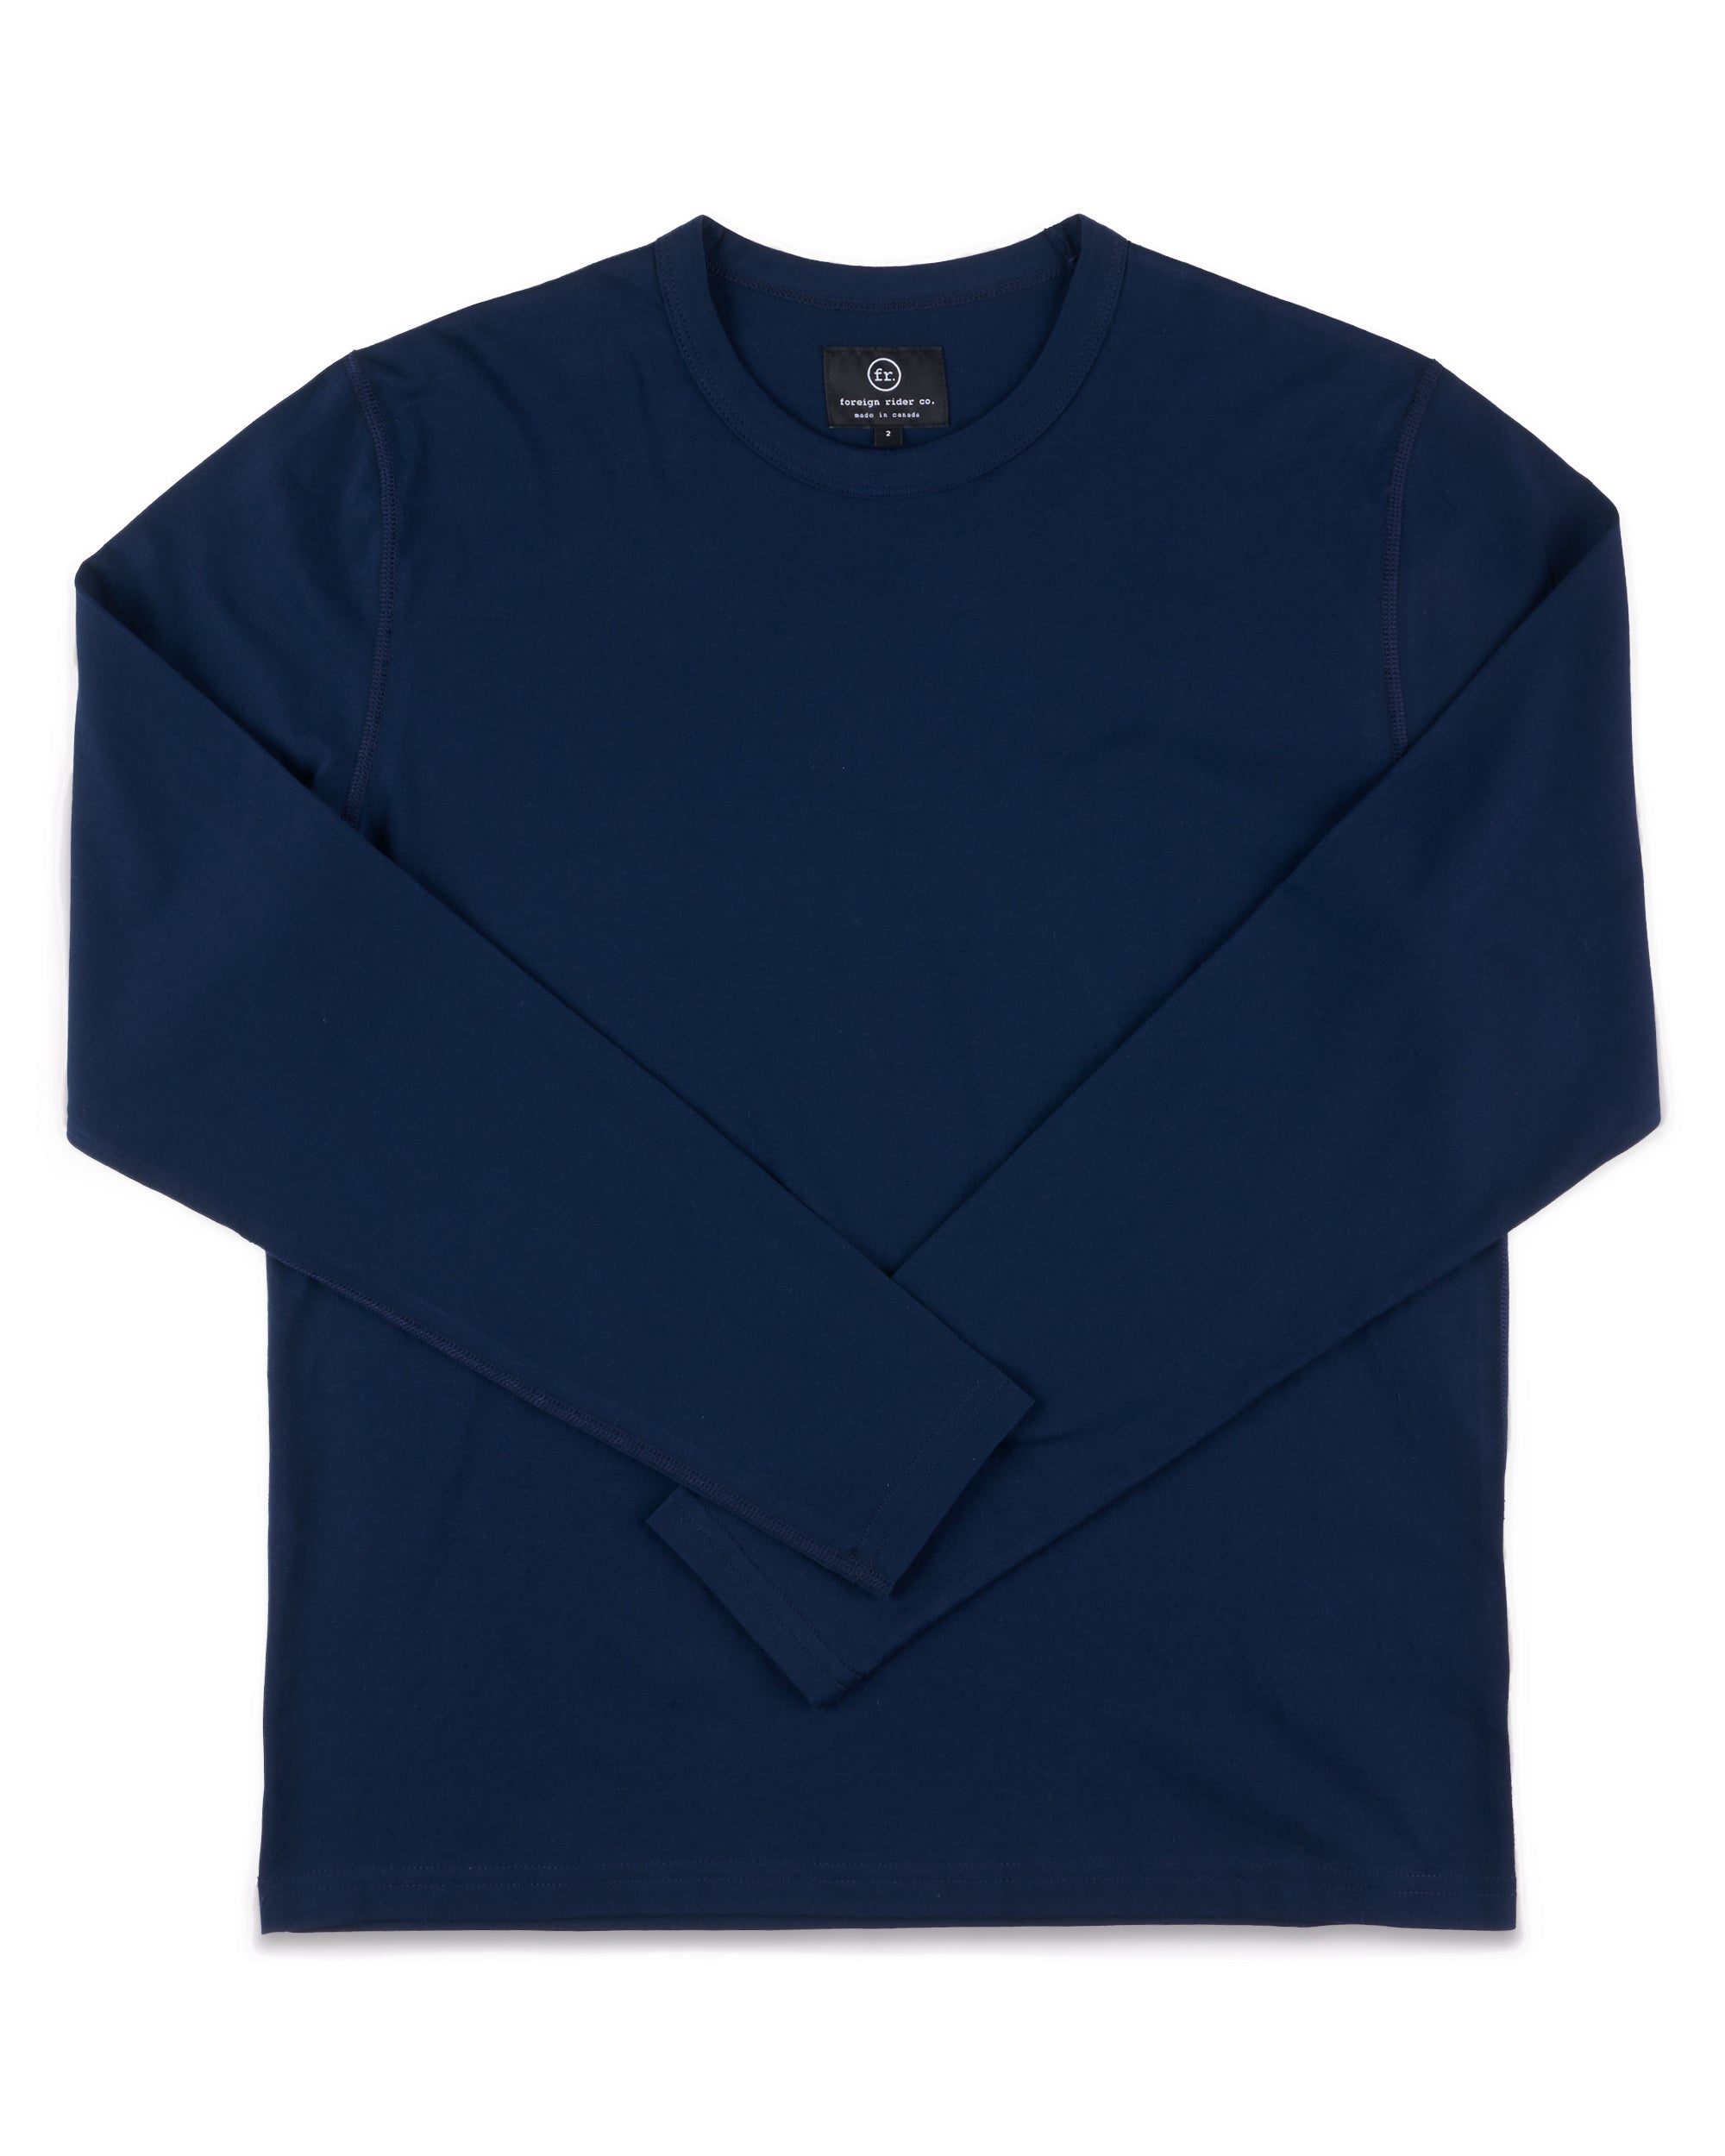 Supima LS T-Shirt Navy - Foreign Rider Co.